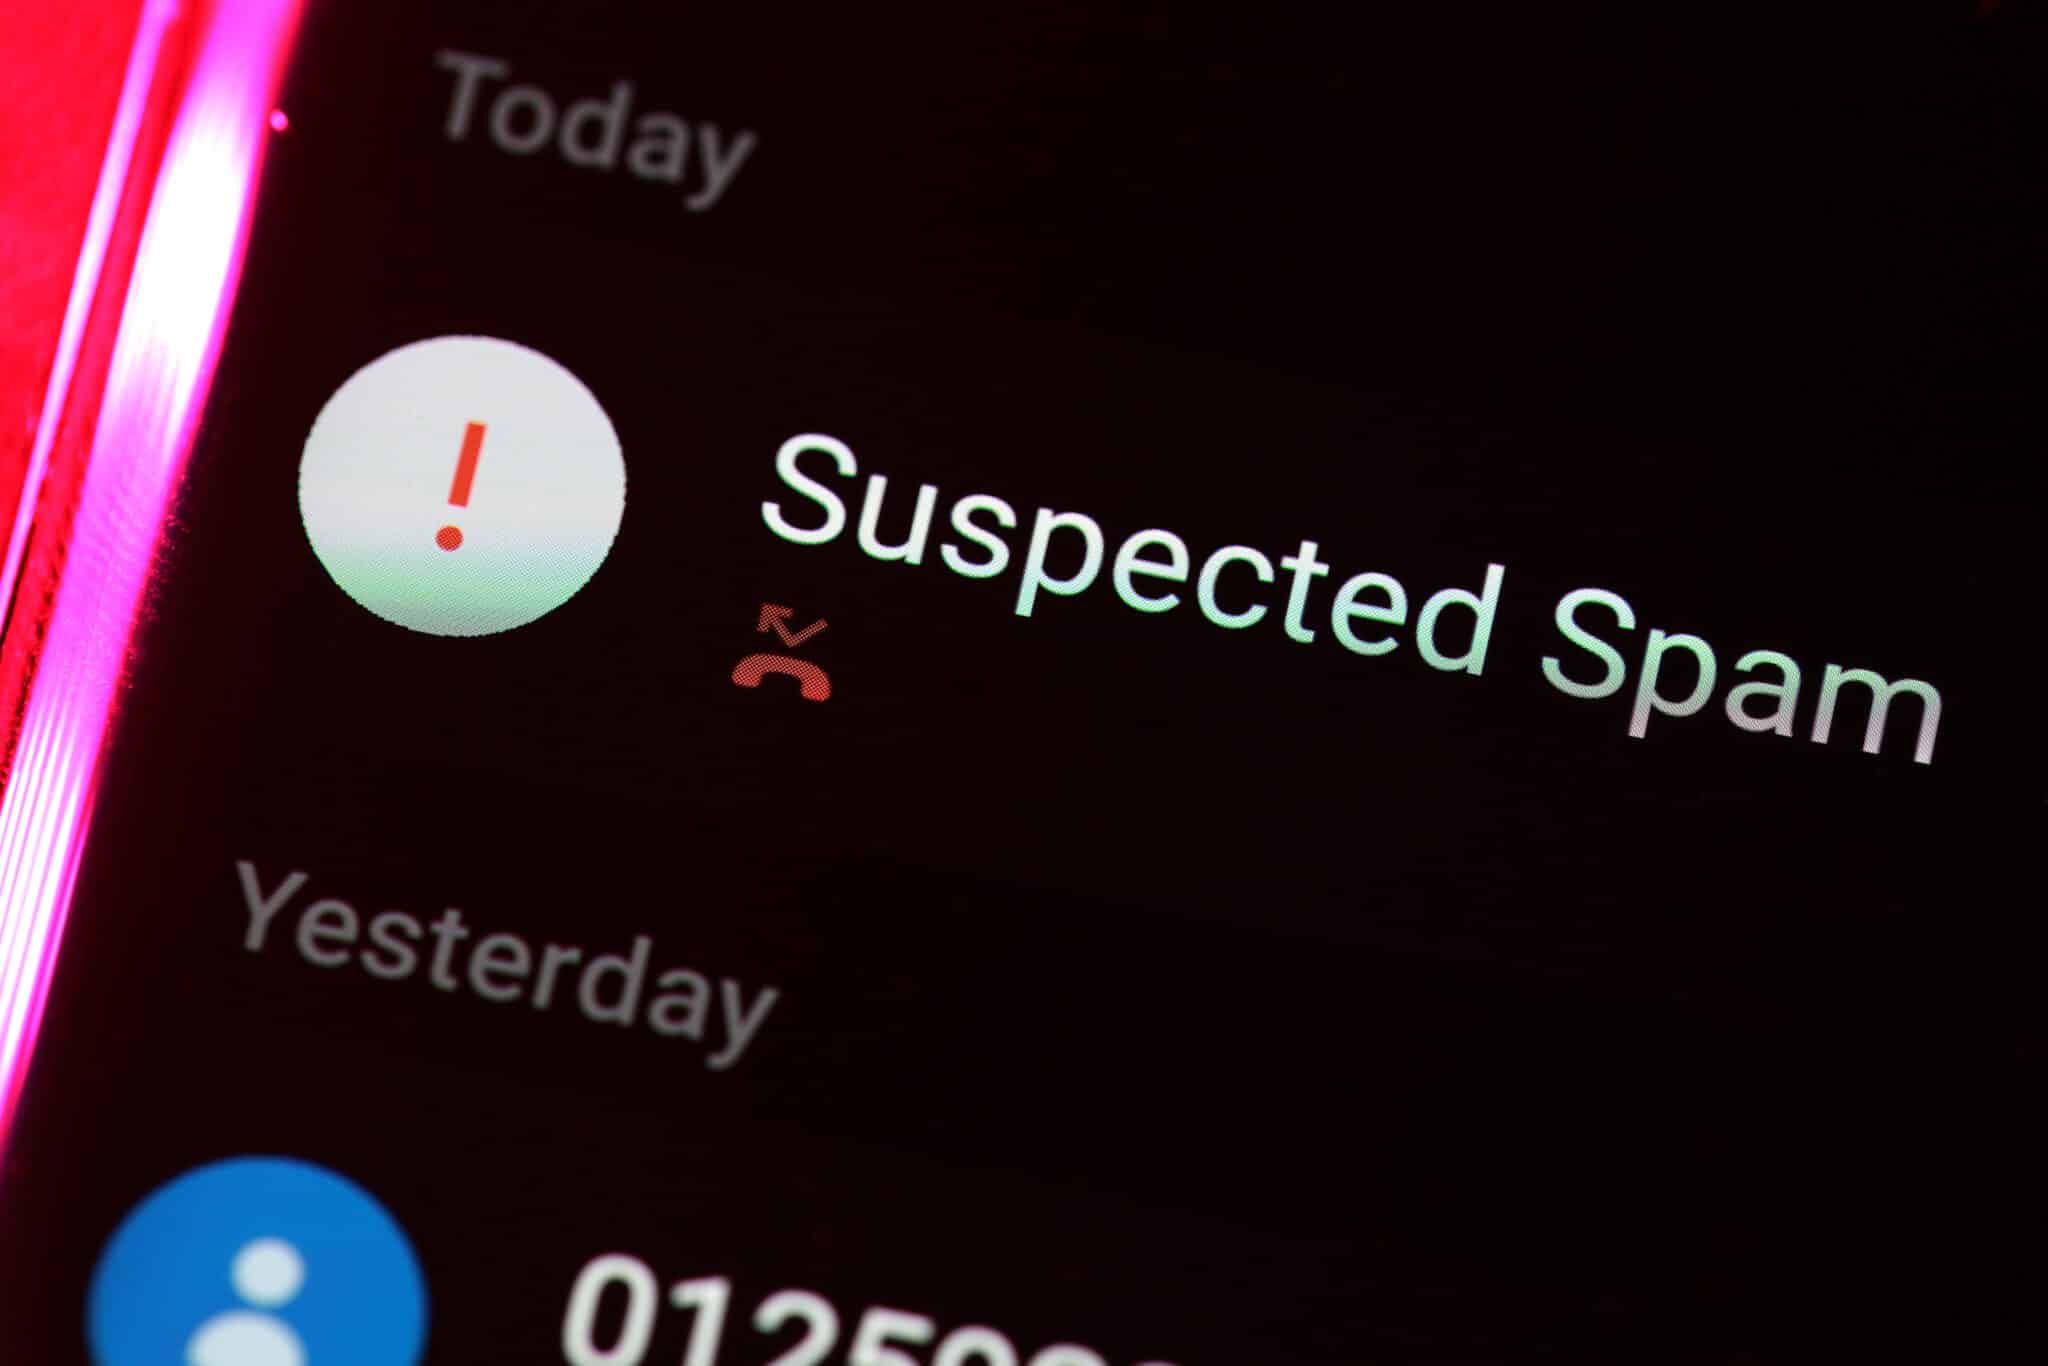 suspected spam call on phone